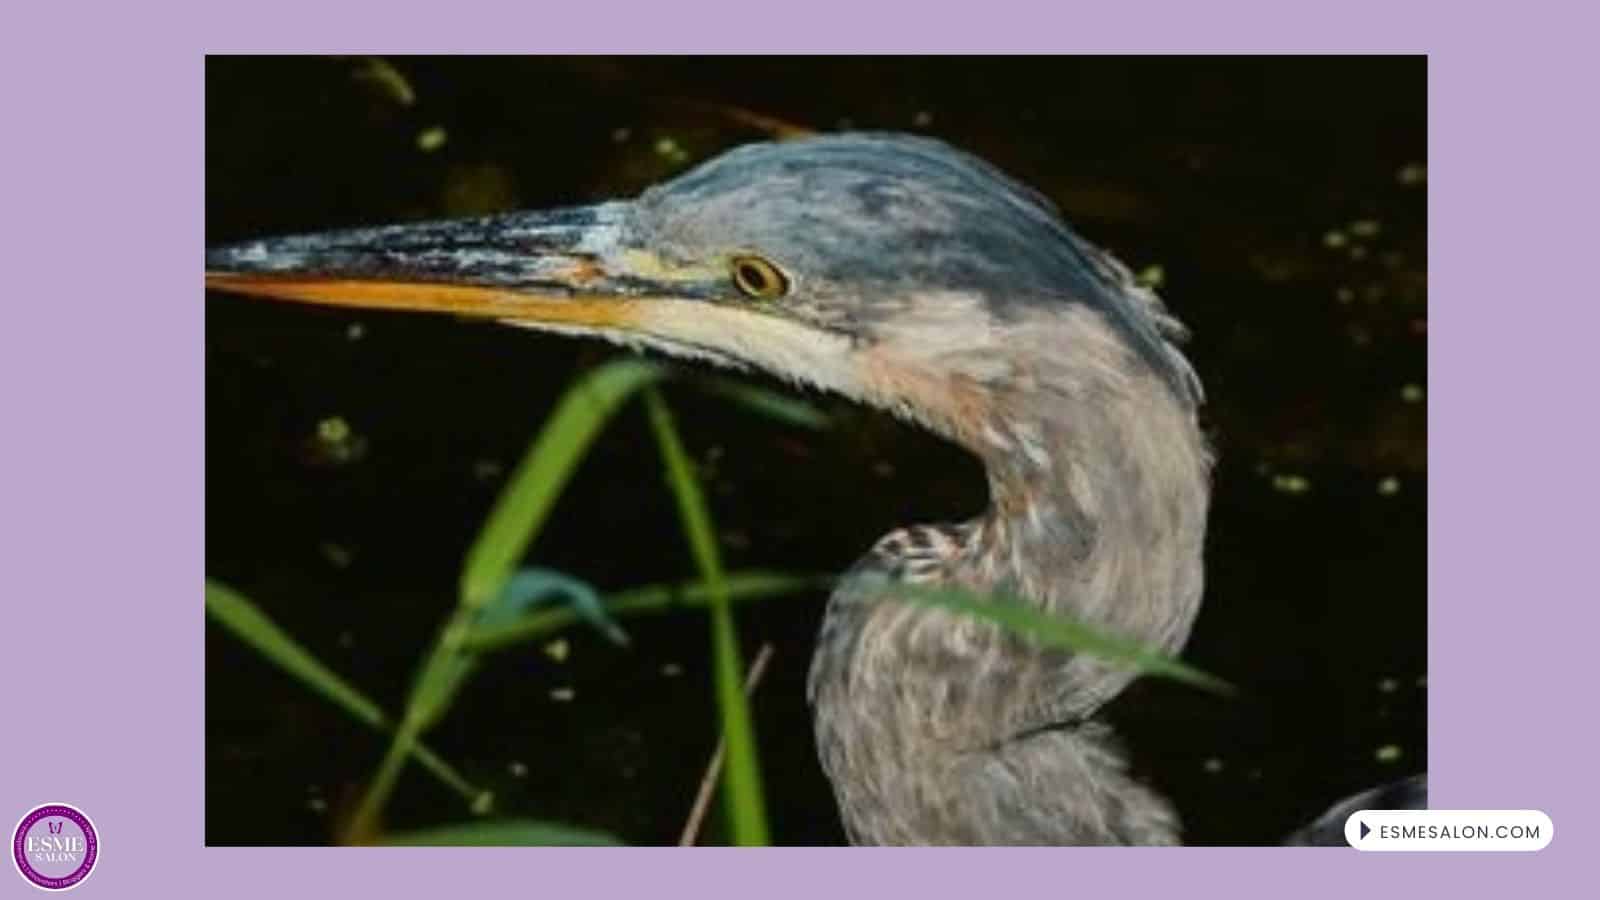 an image of a closeup of the face of a Great Blue Heron